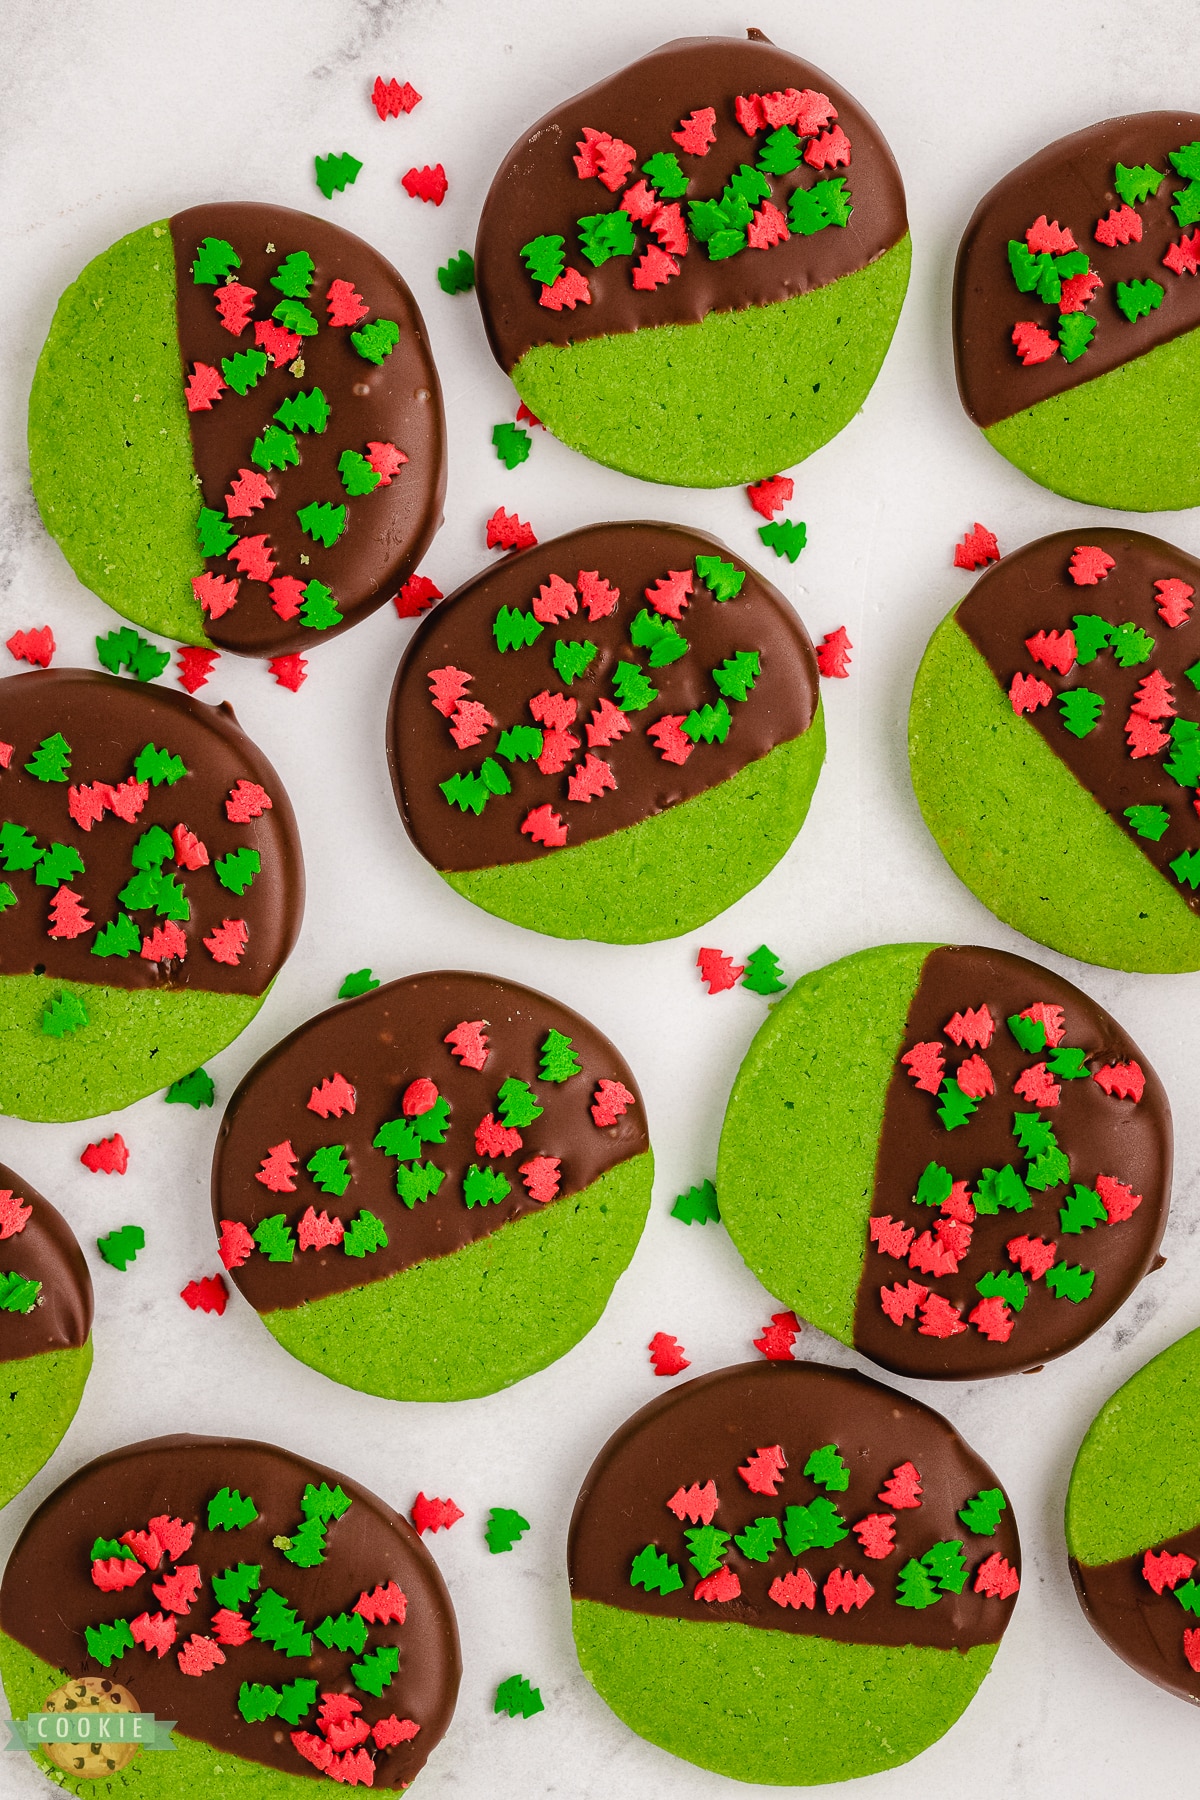 gren Christmas cookies dipped in chocolate